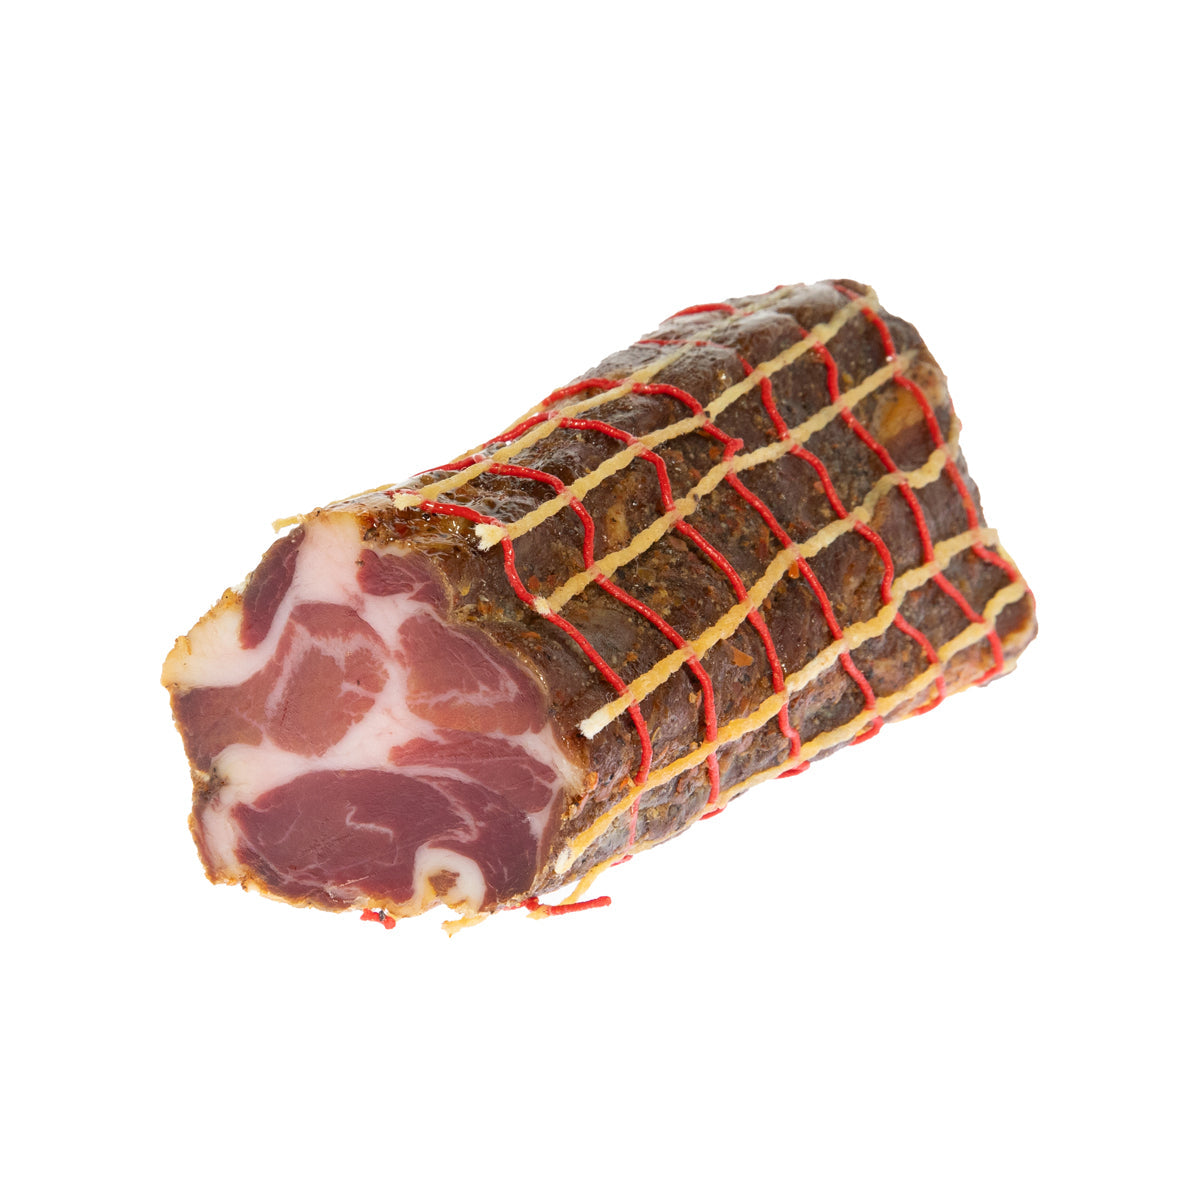 The Spotted Trotter Coppa